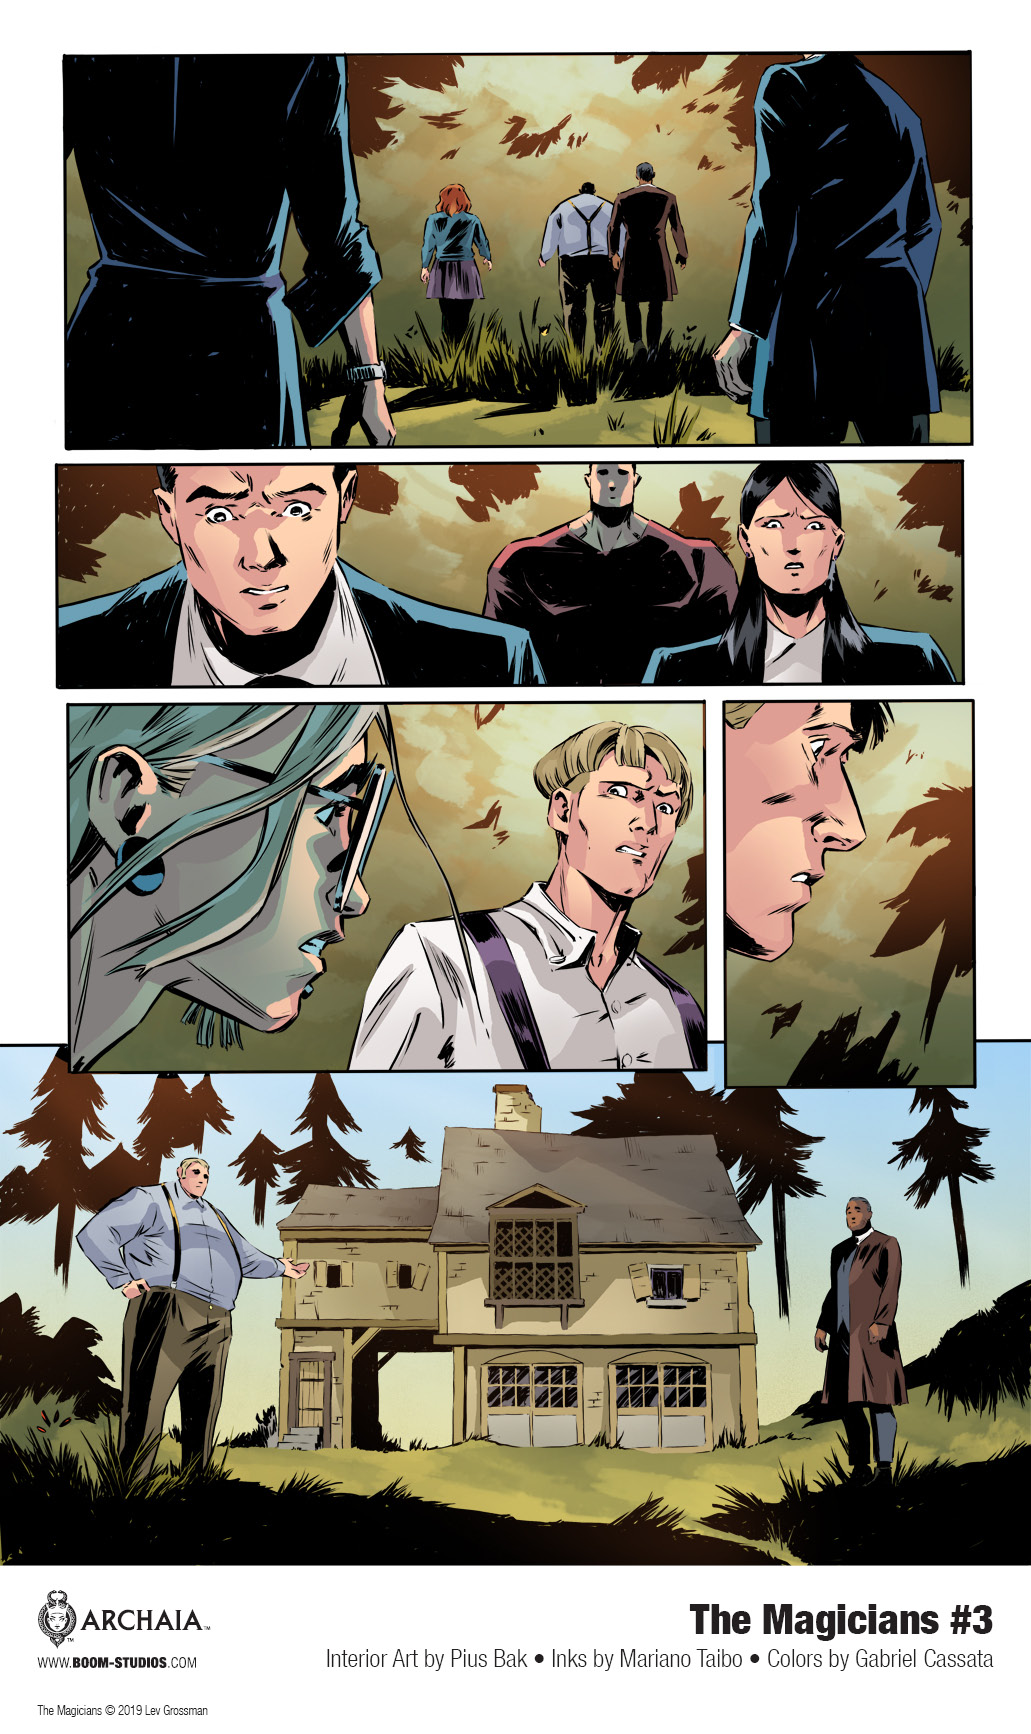 The Magicians #3 preview